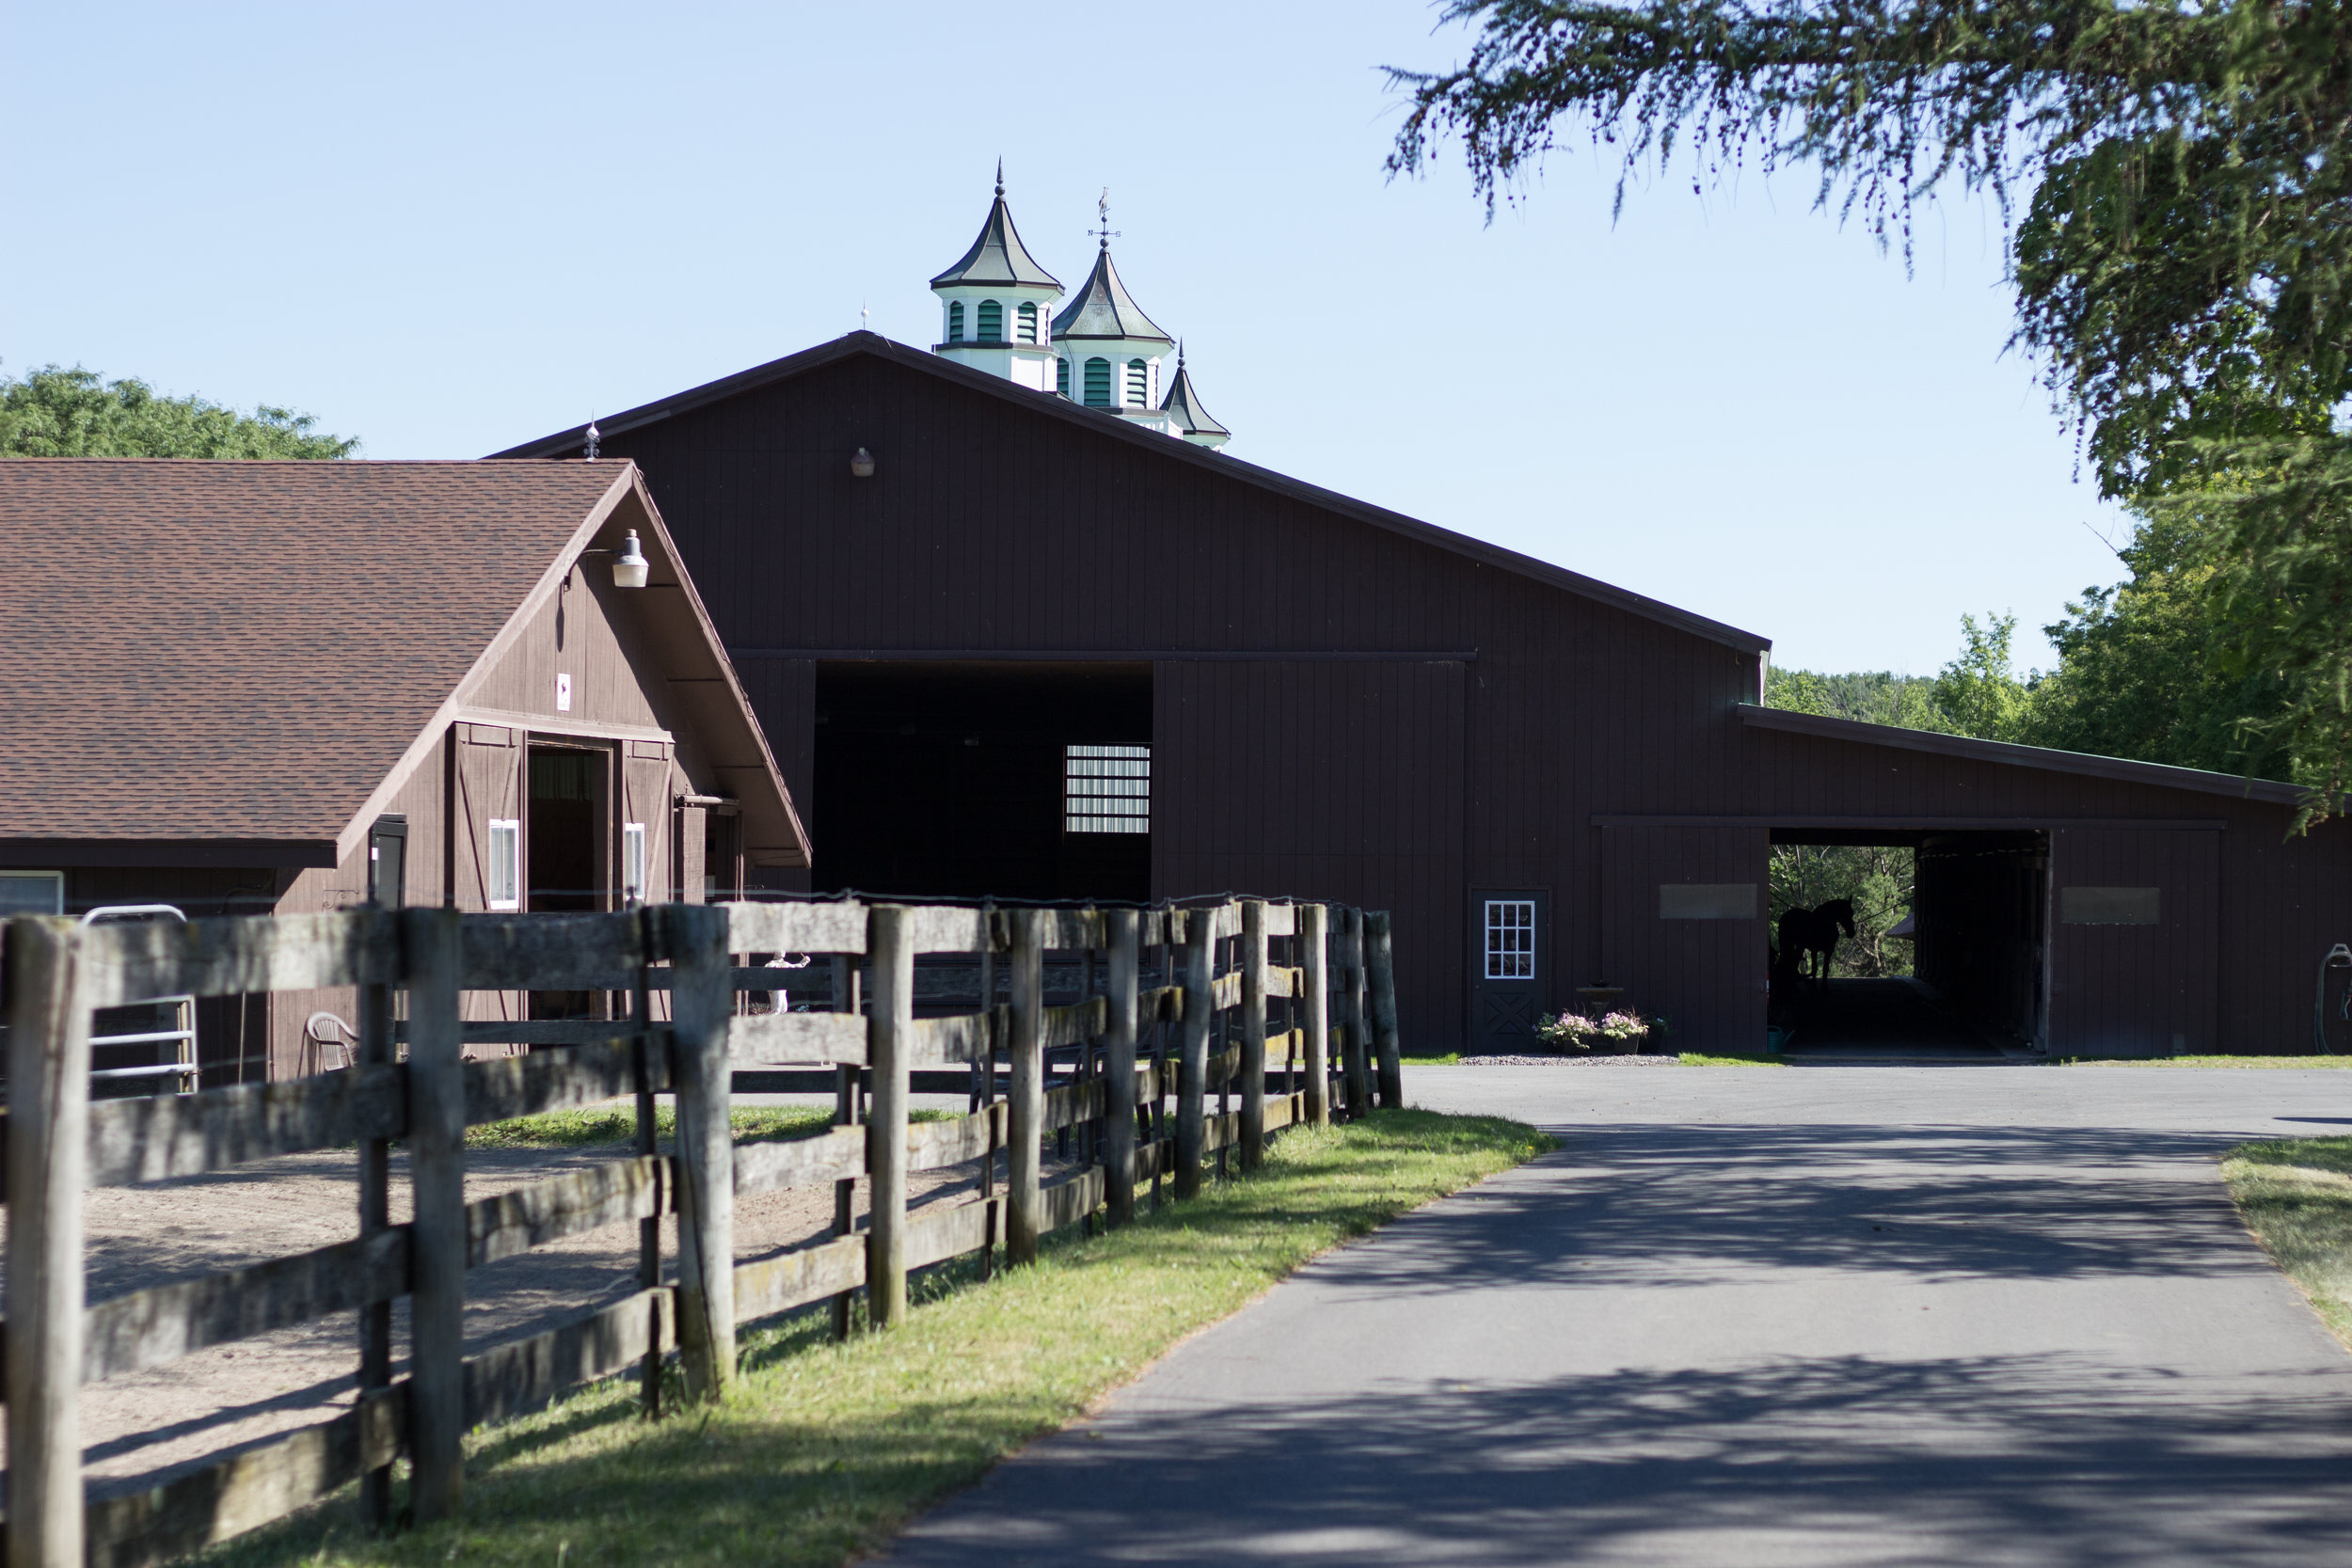  We also provide daily and short term stall rentals for those traveling with – or without – their horses. 